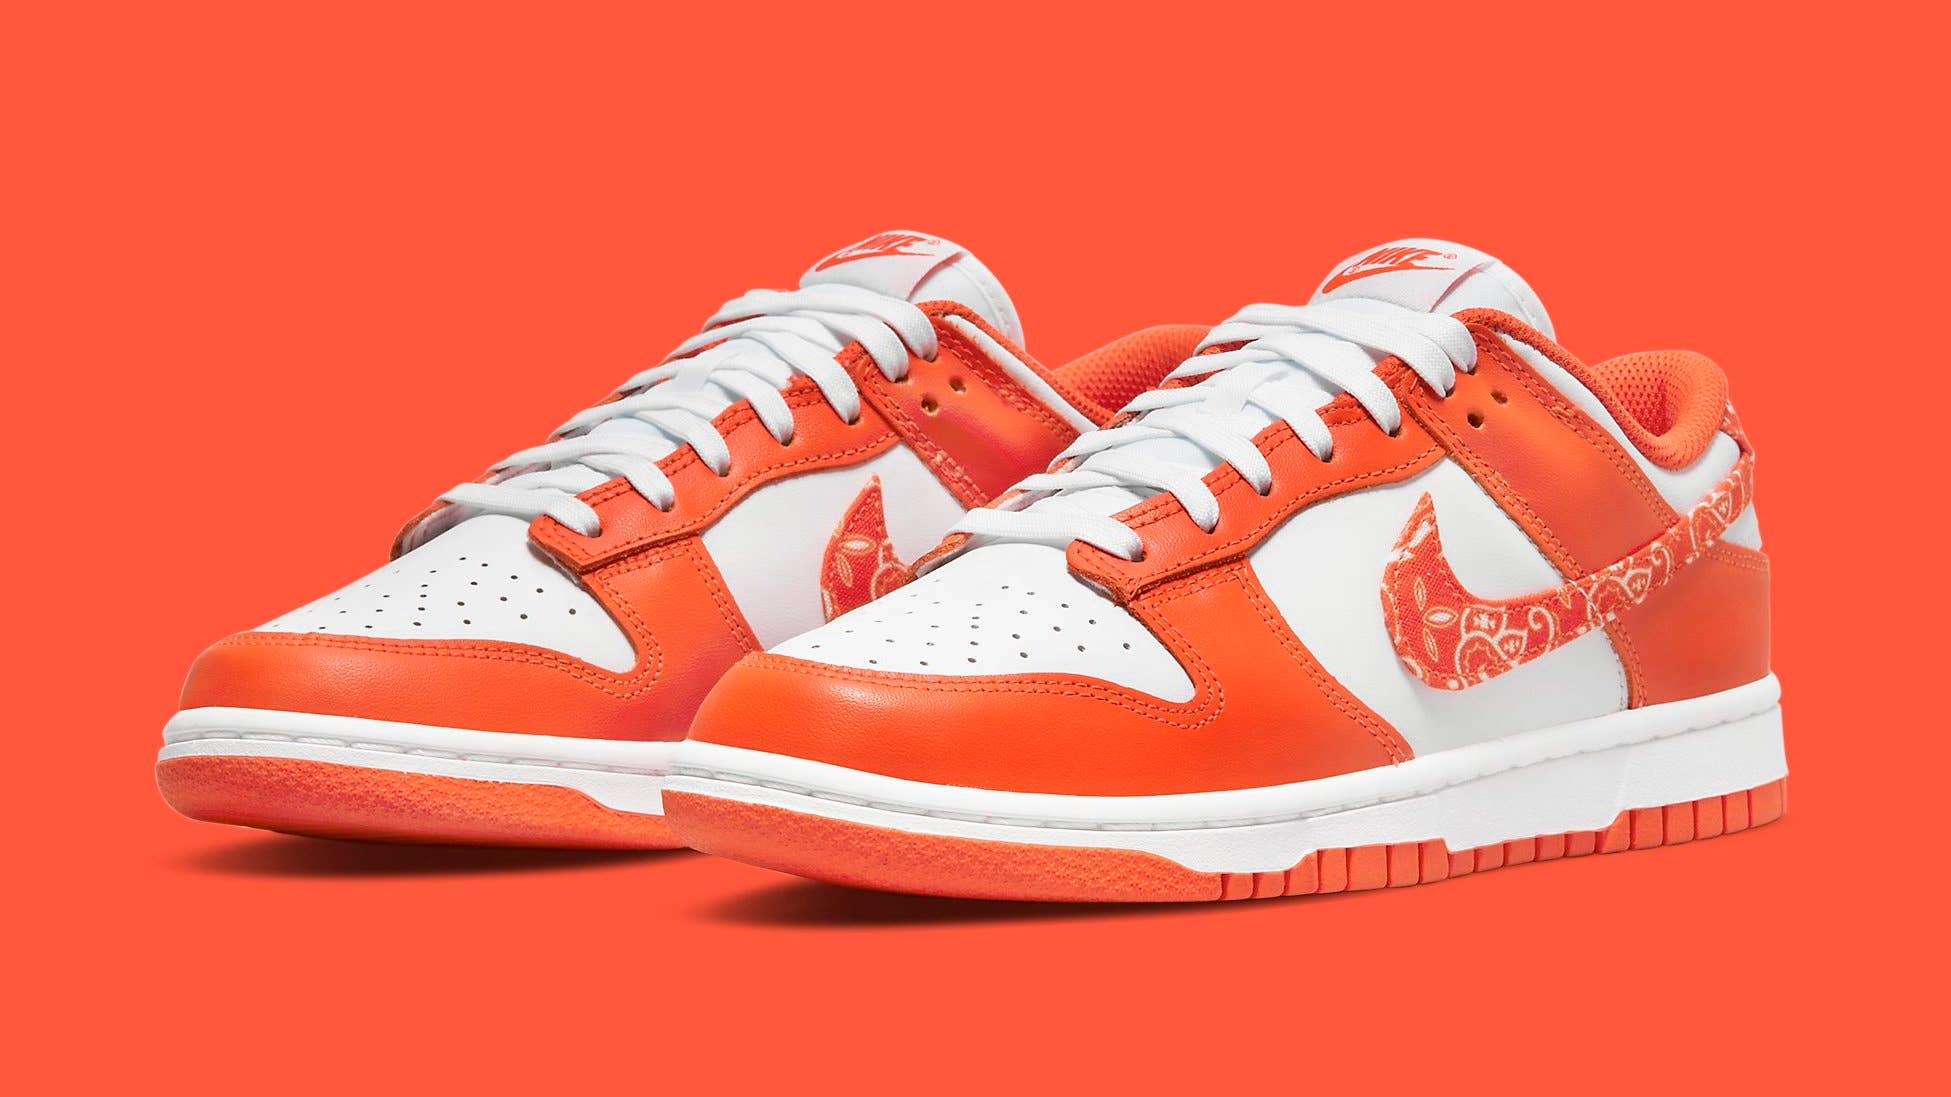 Orange Paisley' Nike Dunk Lows Are Dropping This Week